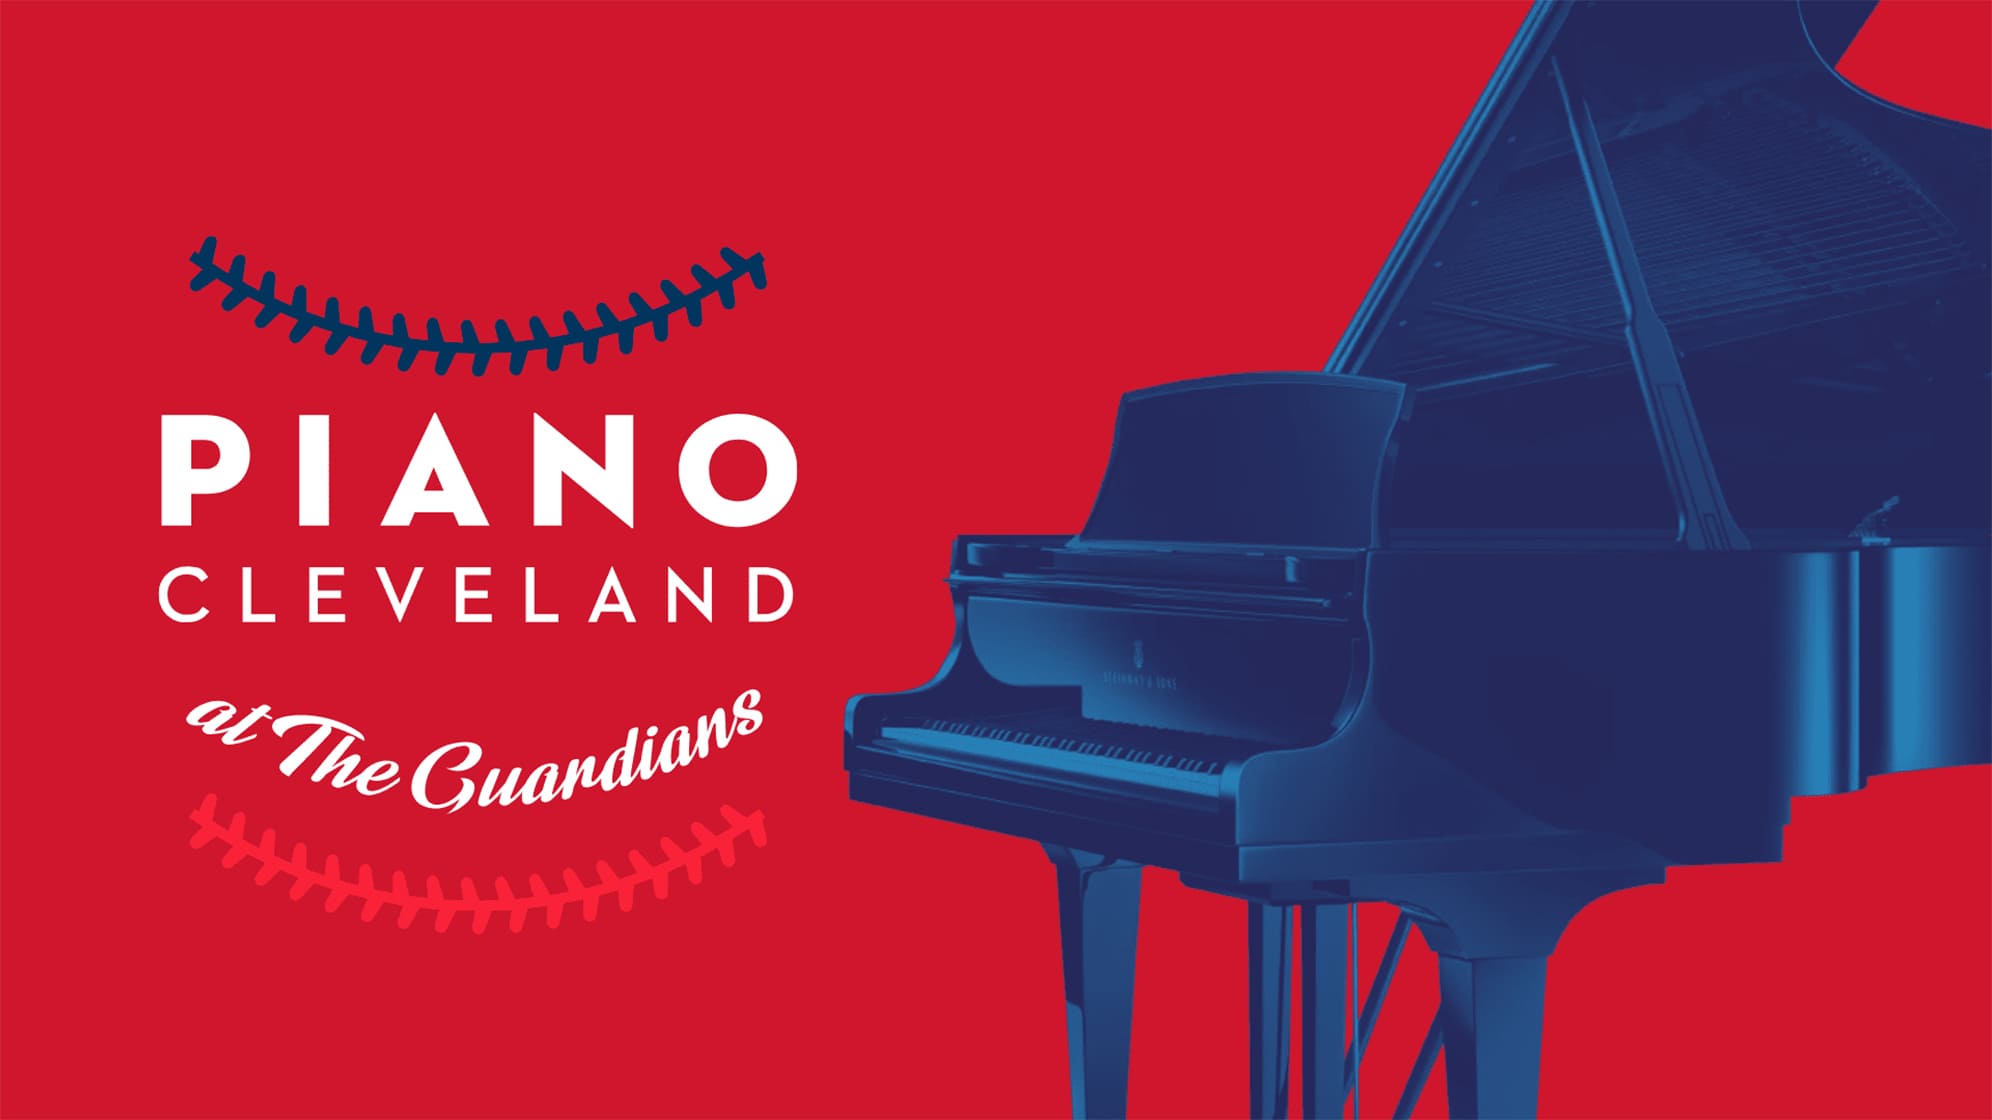 Piano Cleveland at the Guardians